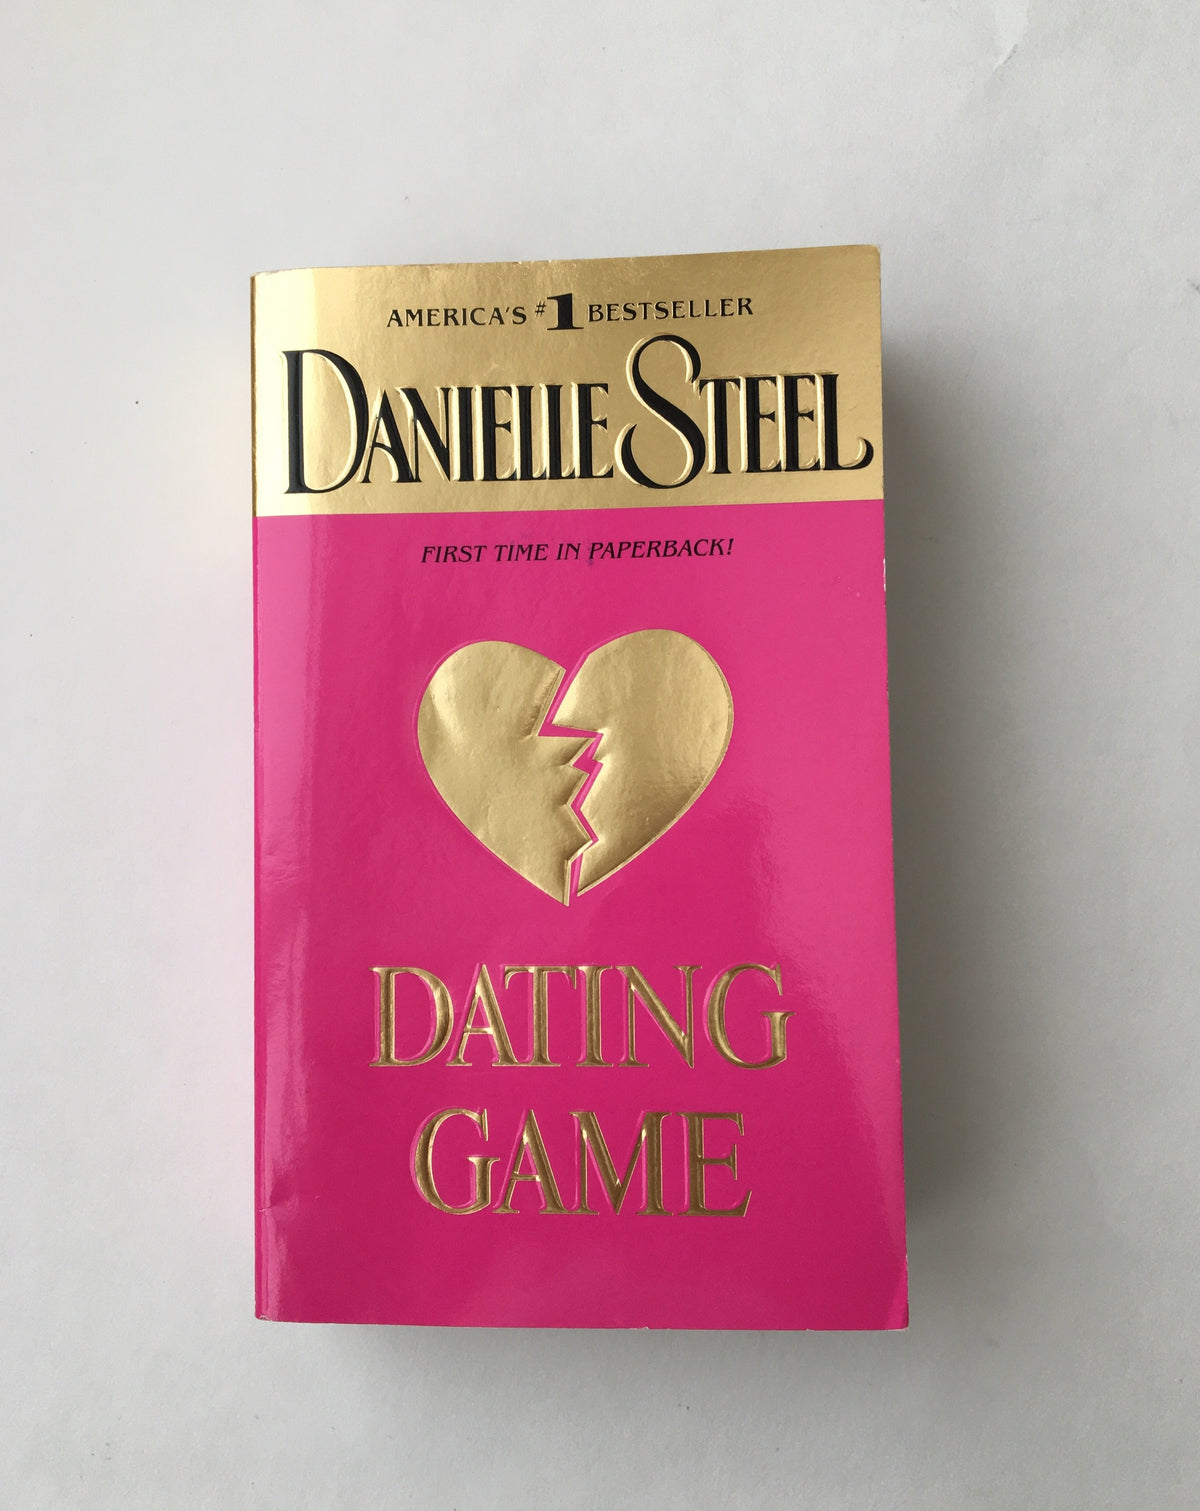 Dating Game by Danielle Steel